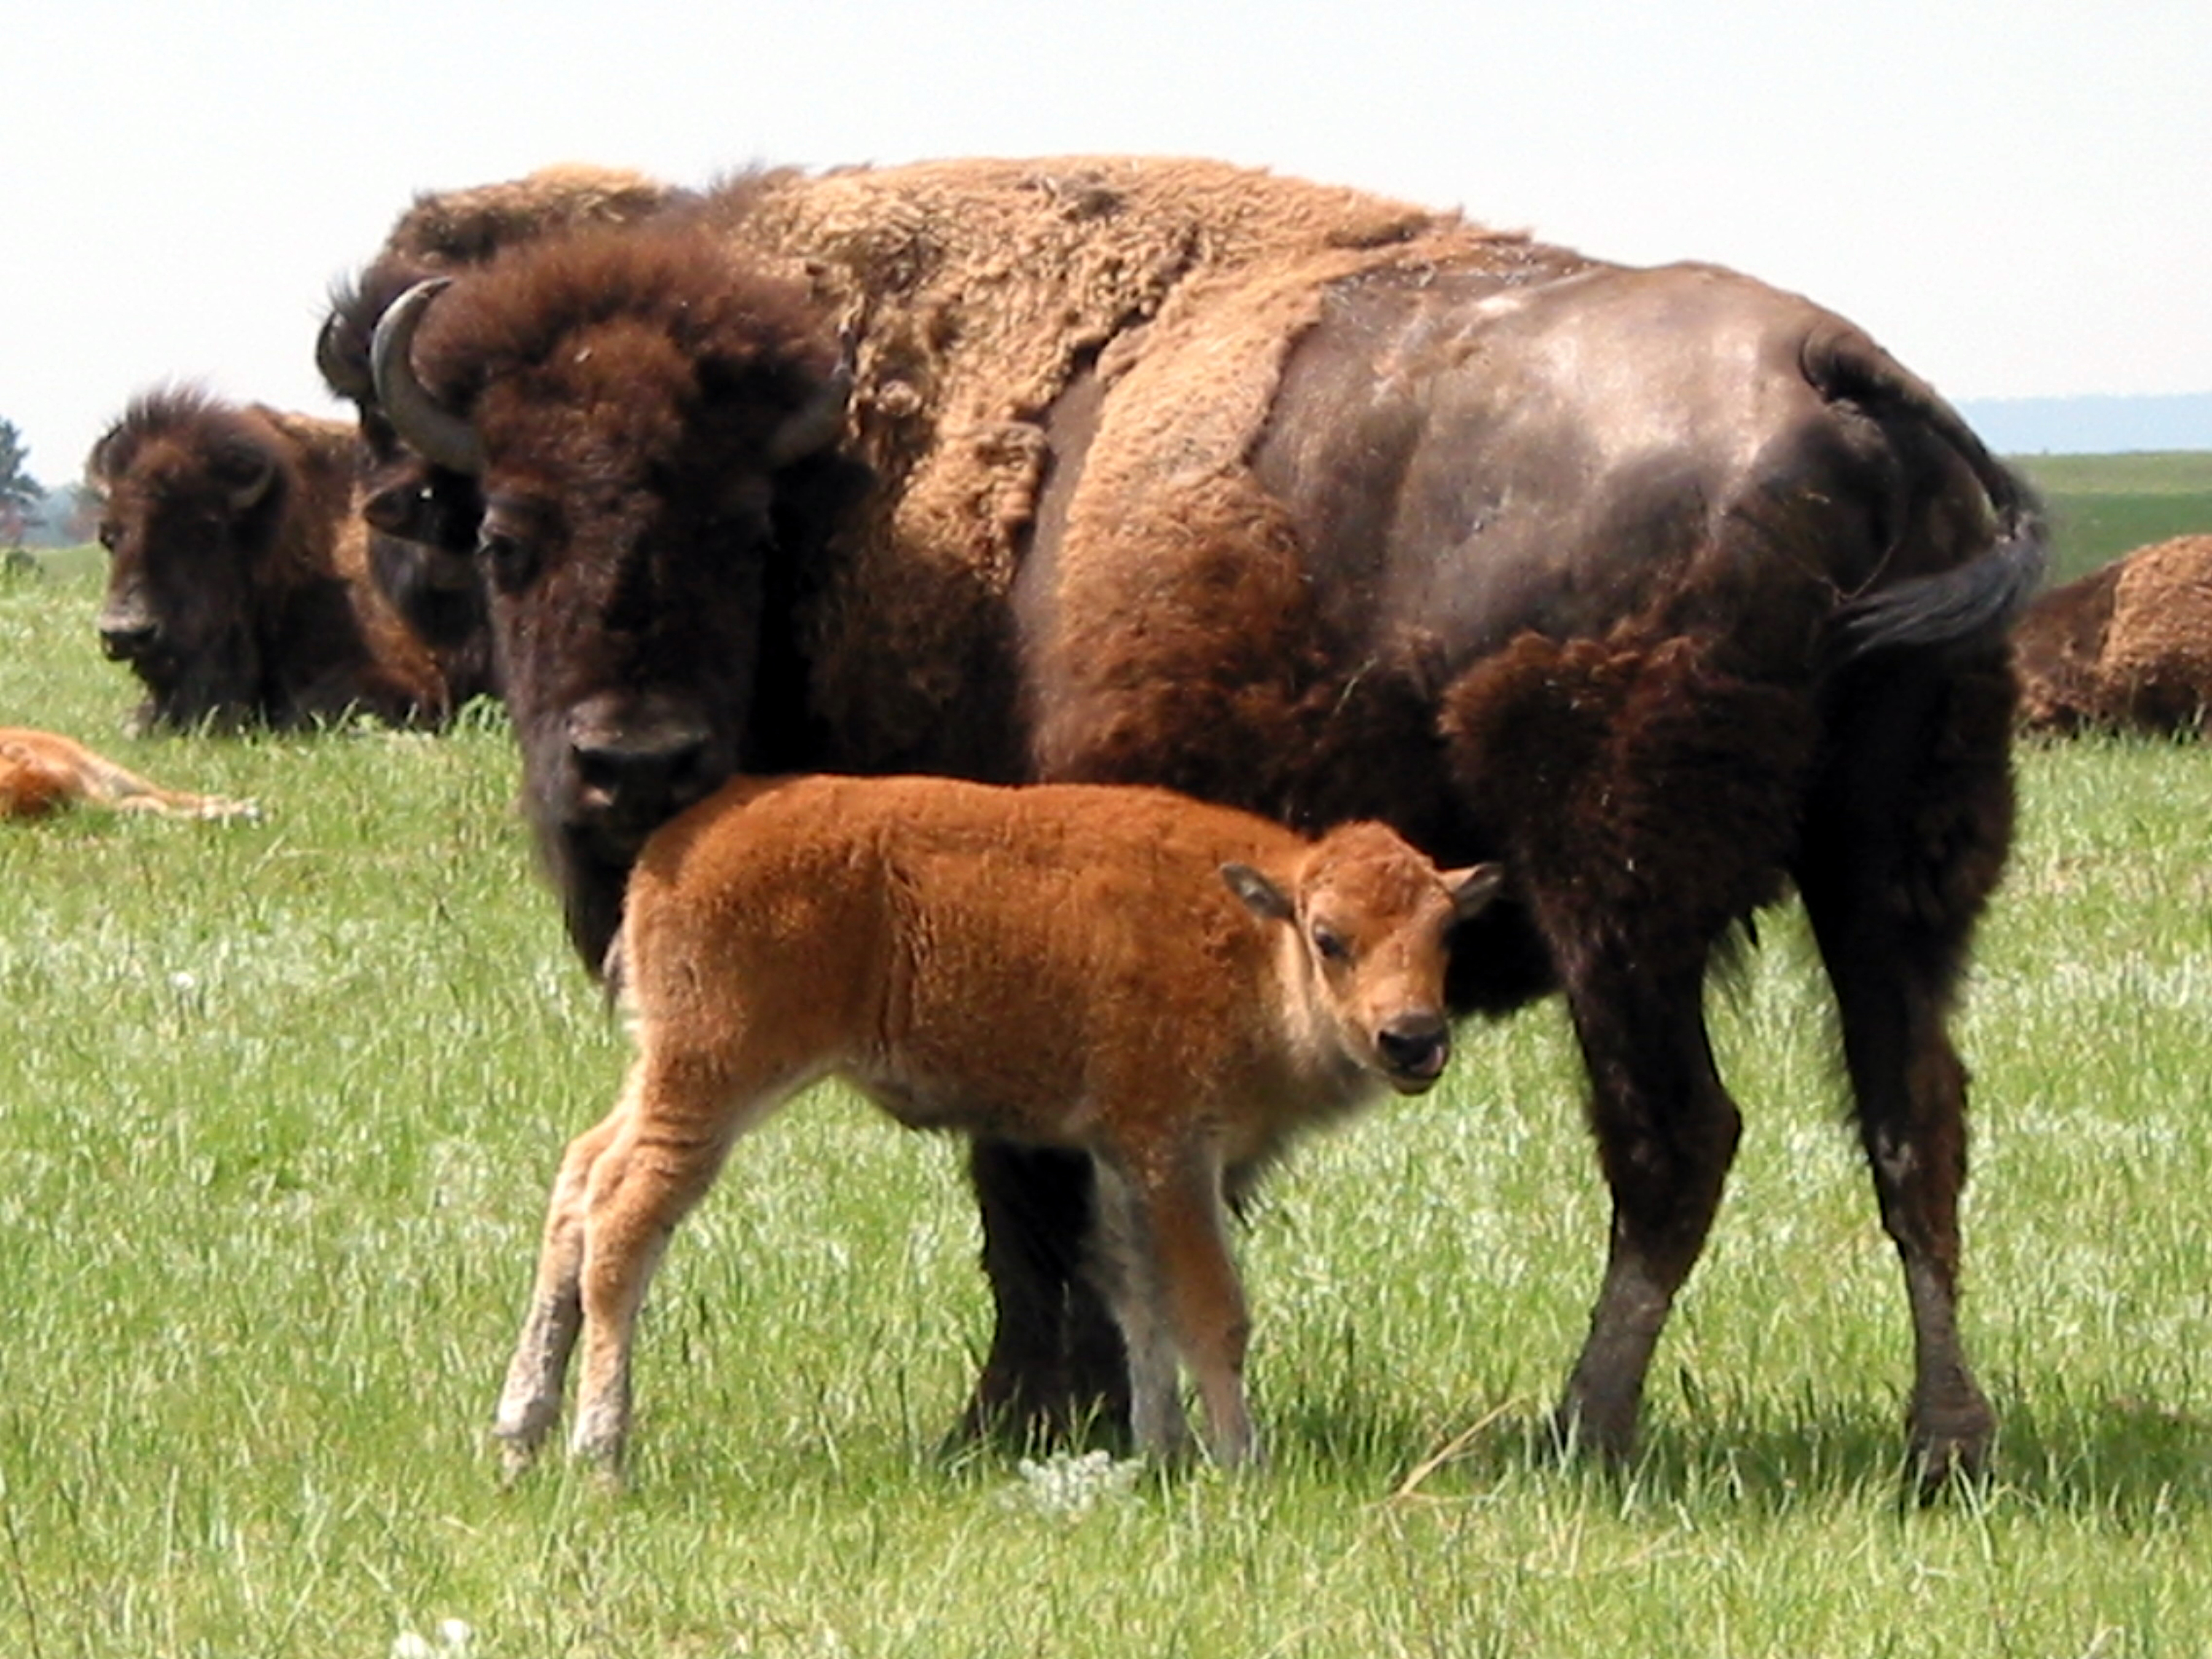 a bison cow and calf on the prairie